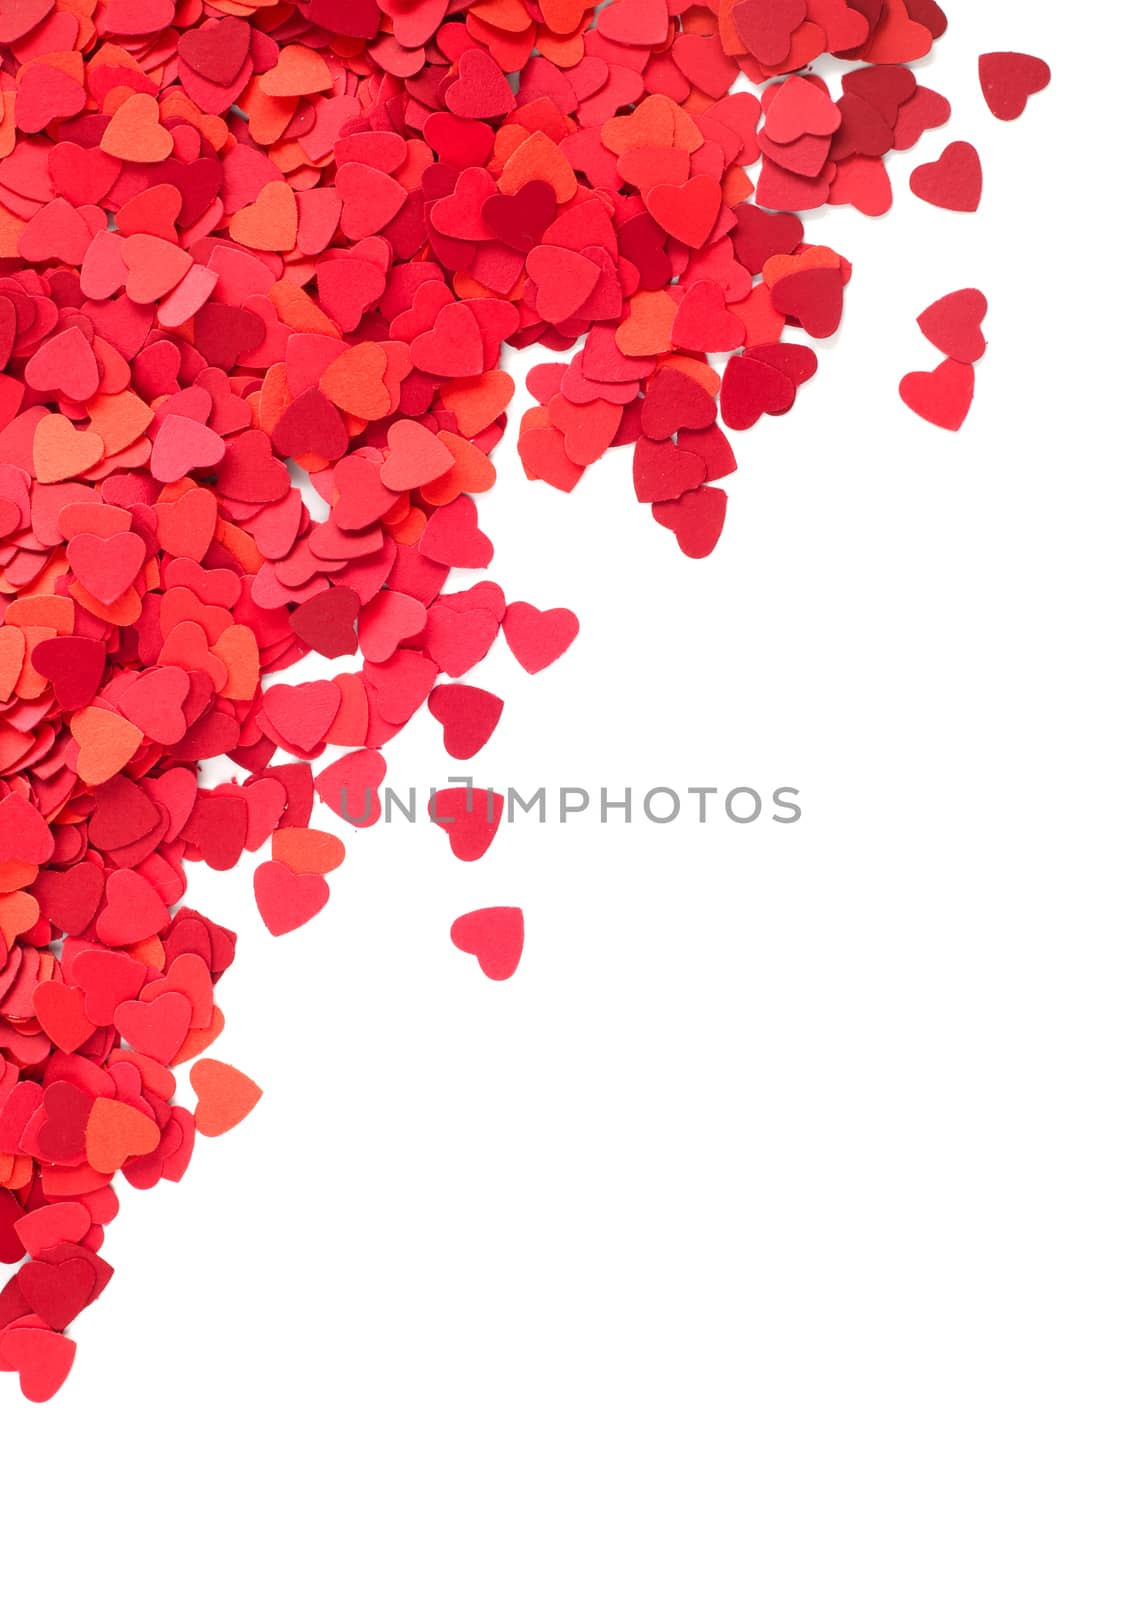 Corner frame made of paper hearts, isolated on white background, Valentines day concept